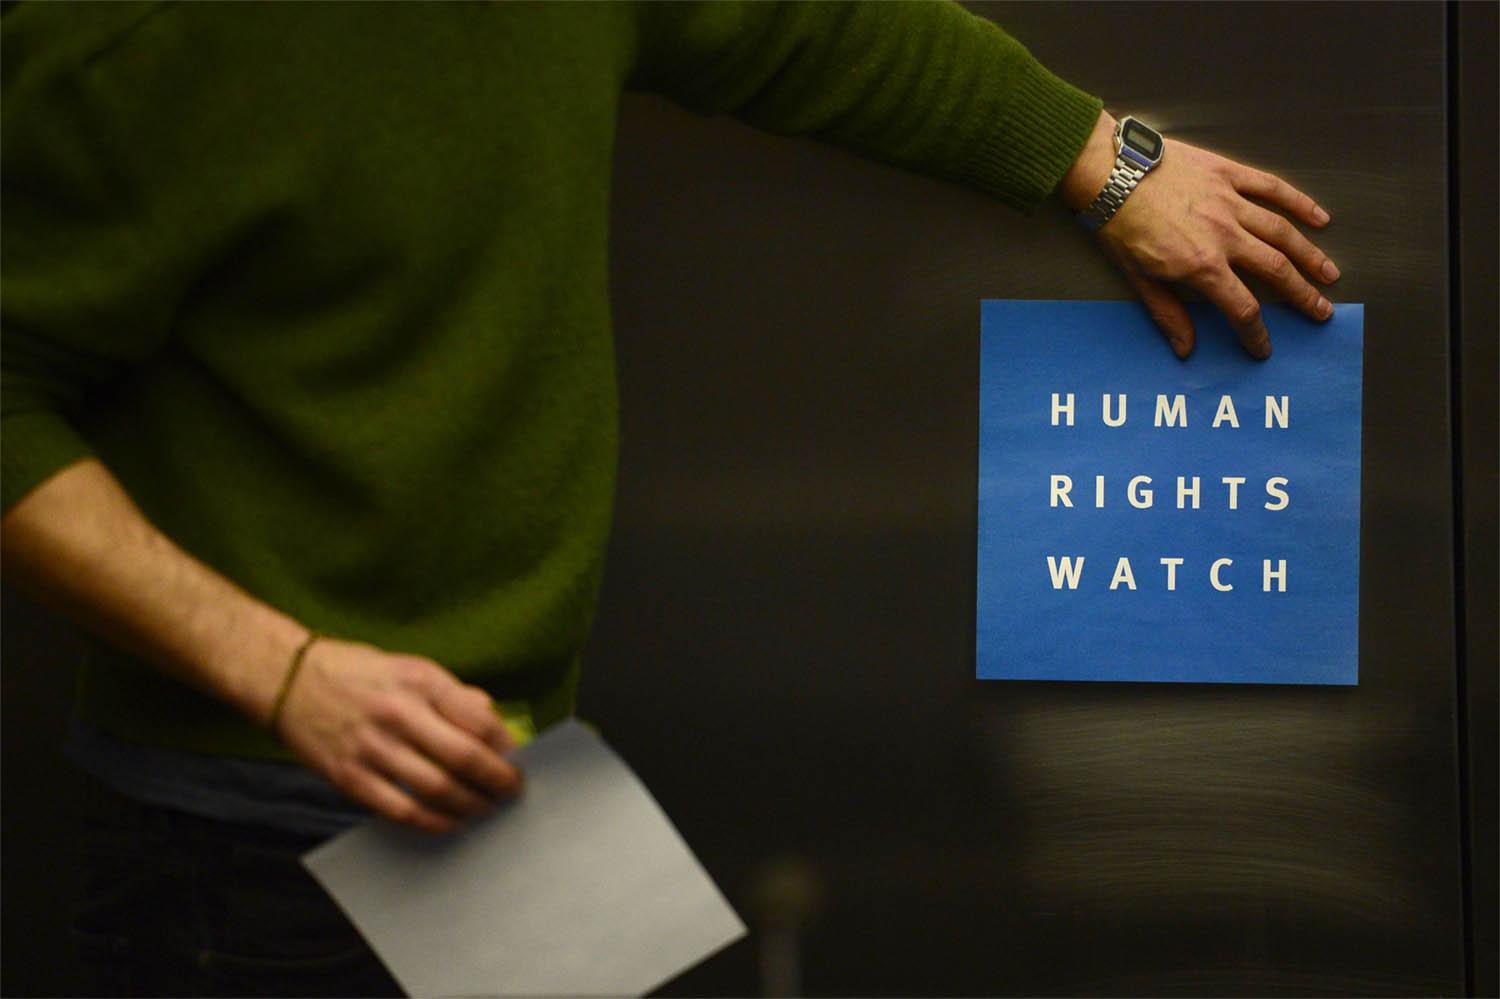 AMME expressed its regret at HRW misleading the international community into believing that Morocco is still living under the era of the years of lead 